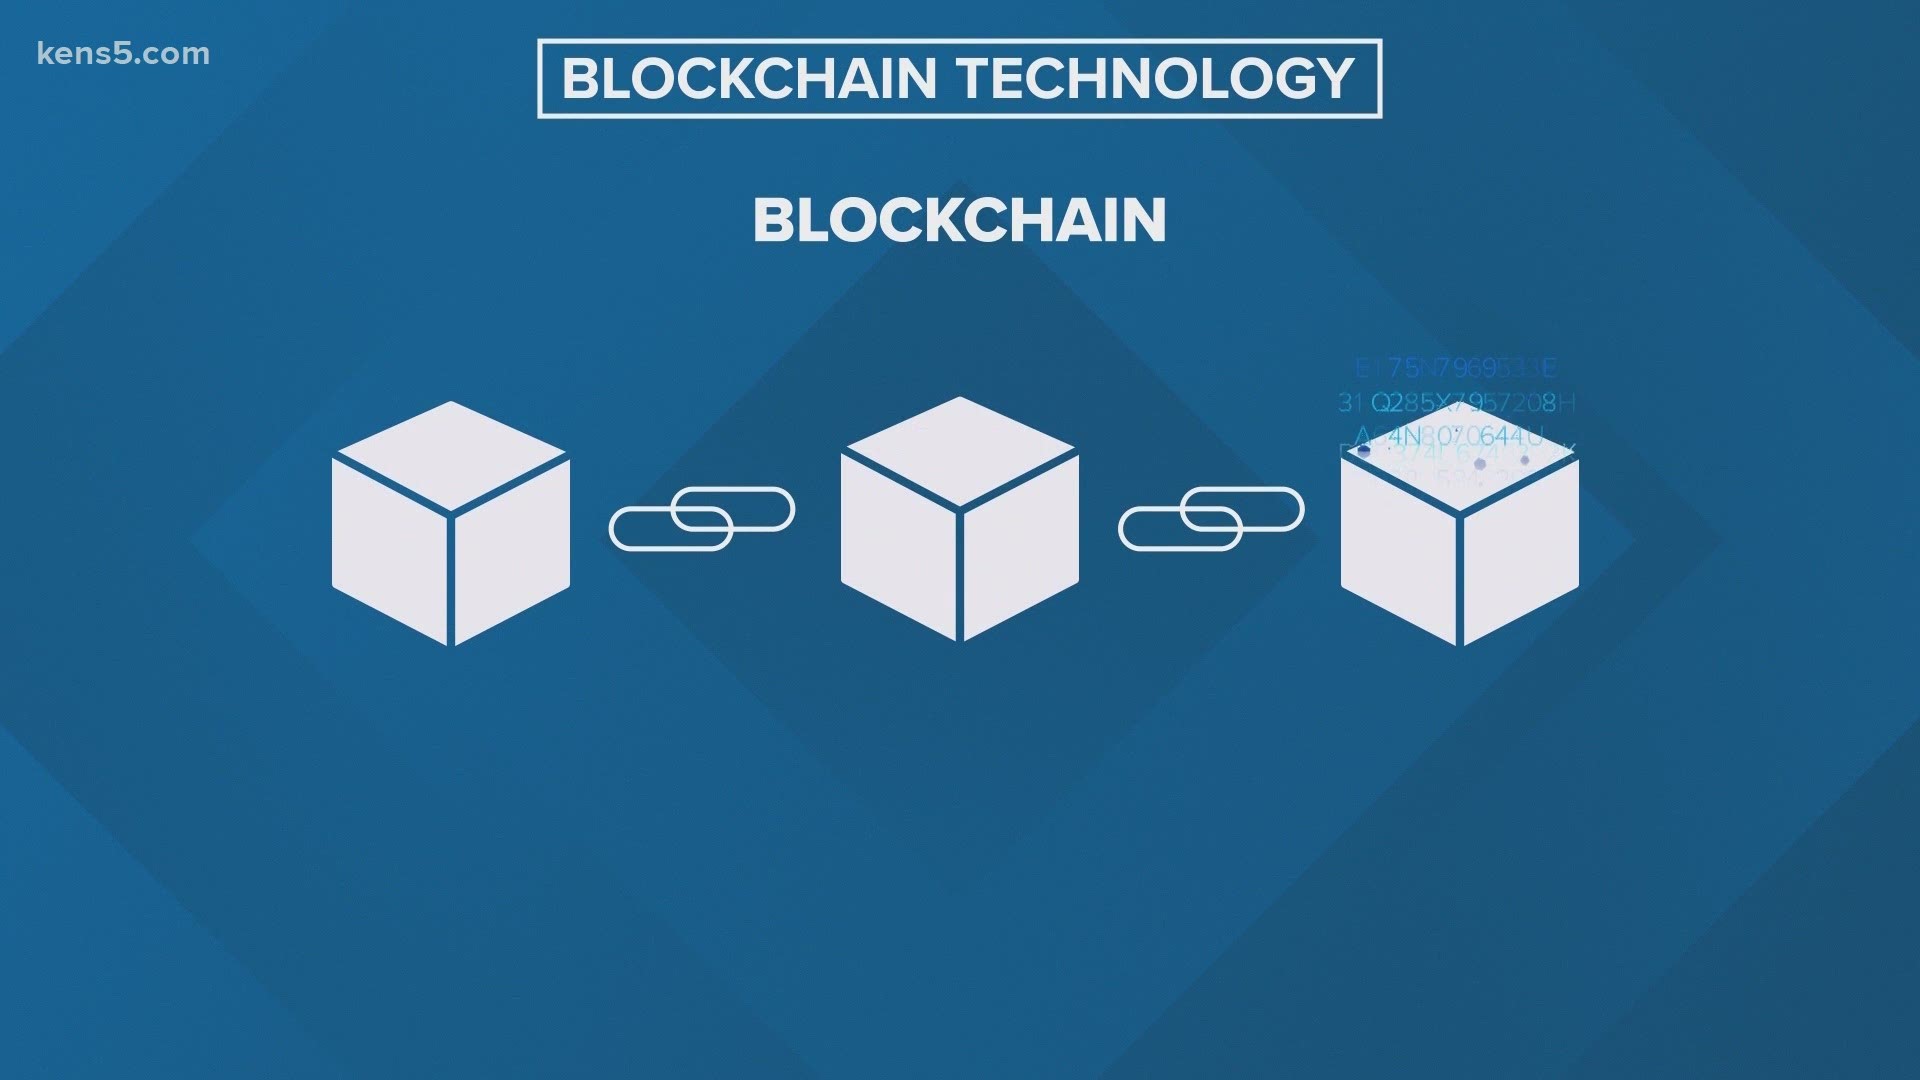 Popular digital assets like bitcoin and NFTs operate on what's called blockchain technology. Here's a quick explainer.